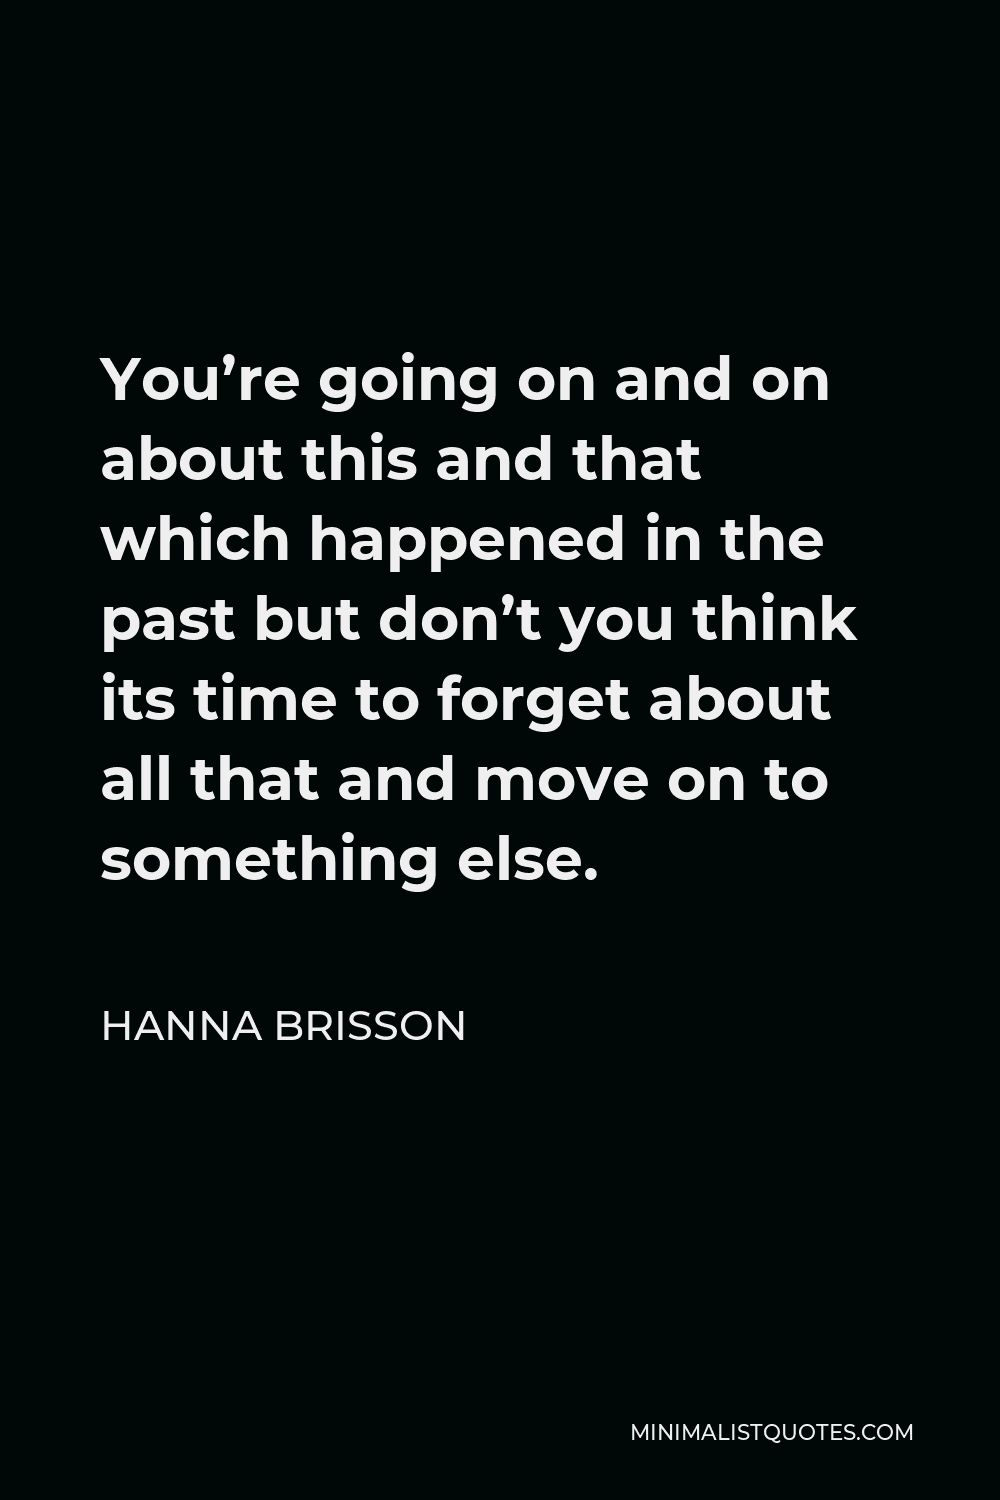 Hanna Brisson Quote - You’re going on and on about this and that which happened in the past but don’t you think its time to forget about all that and move on to something else.